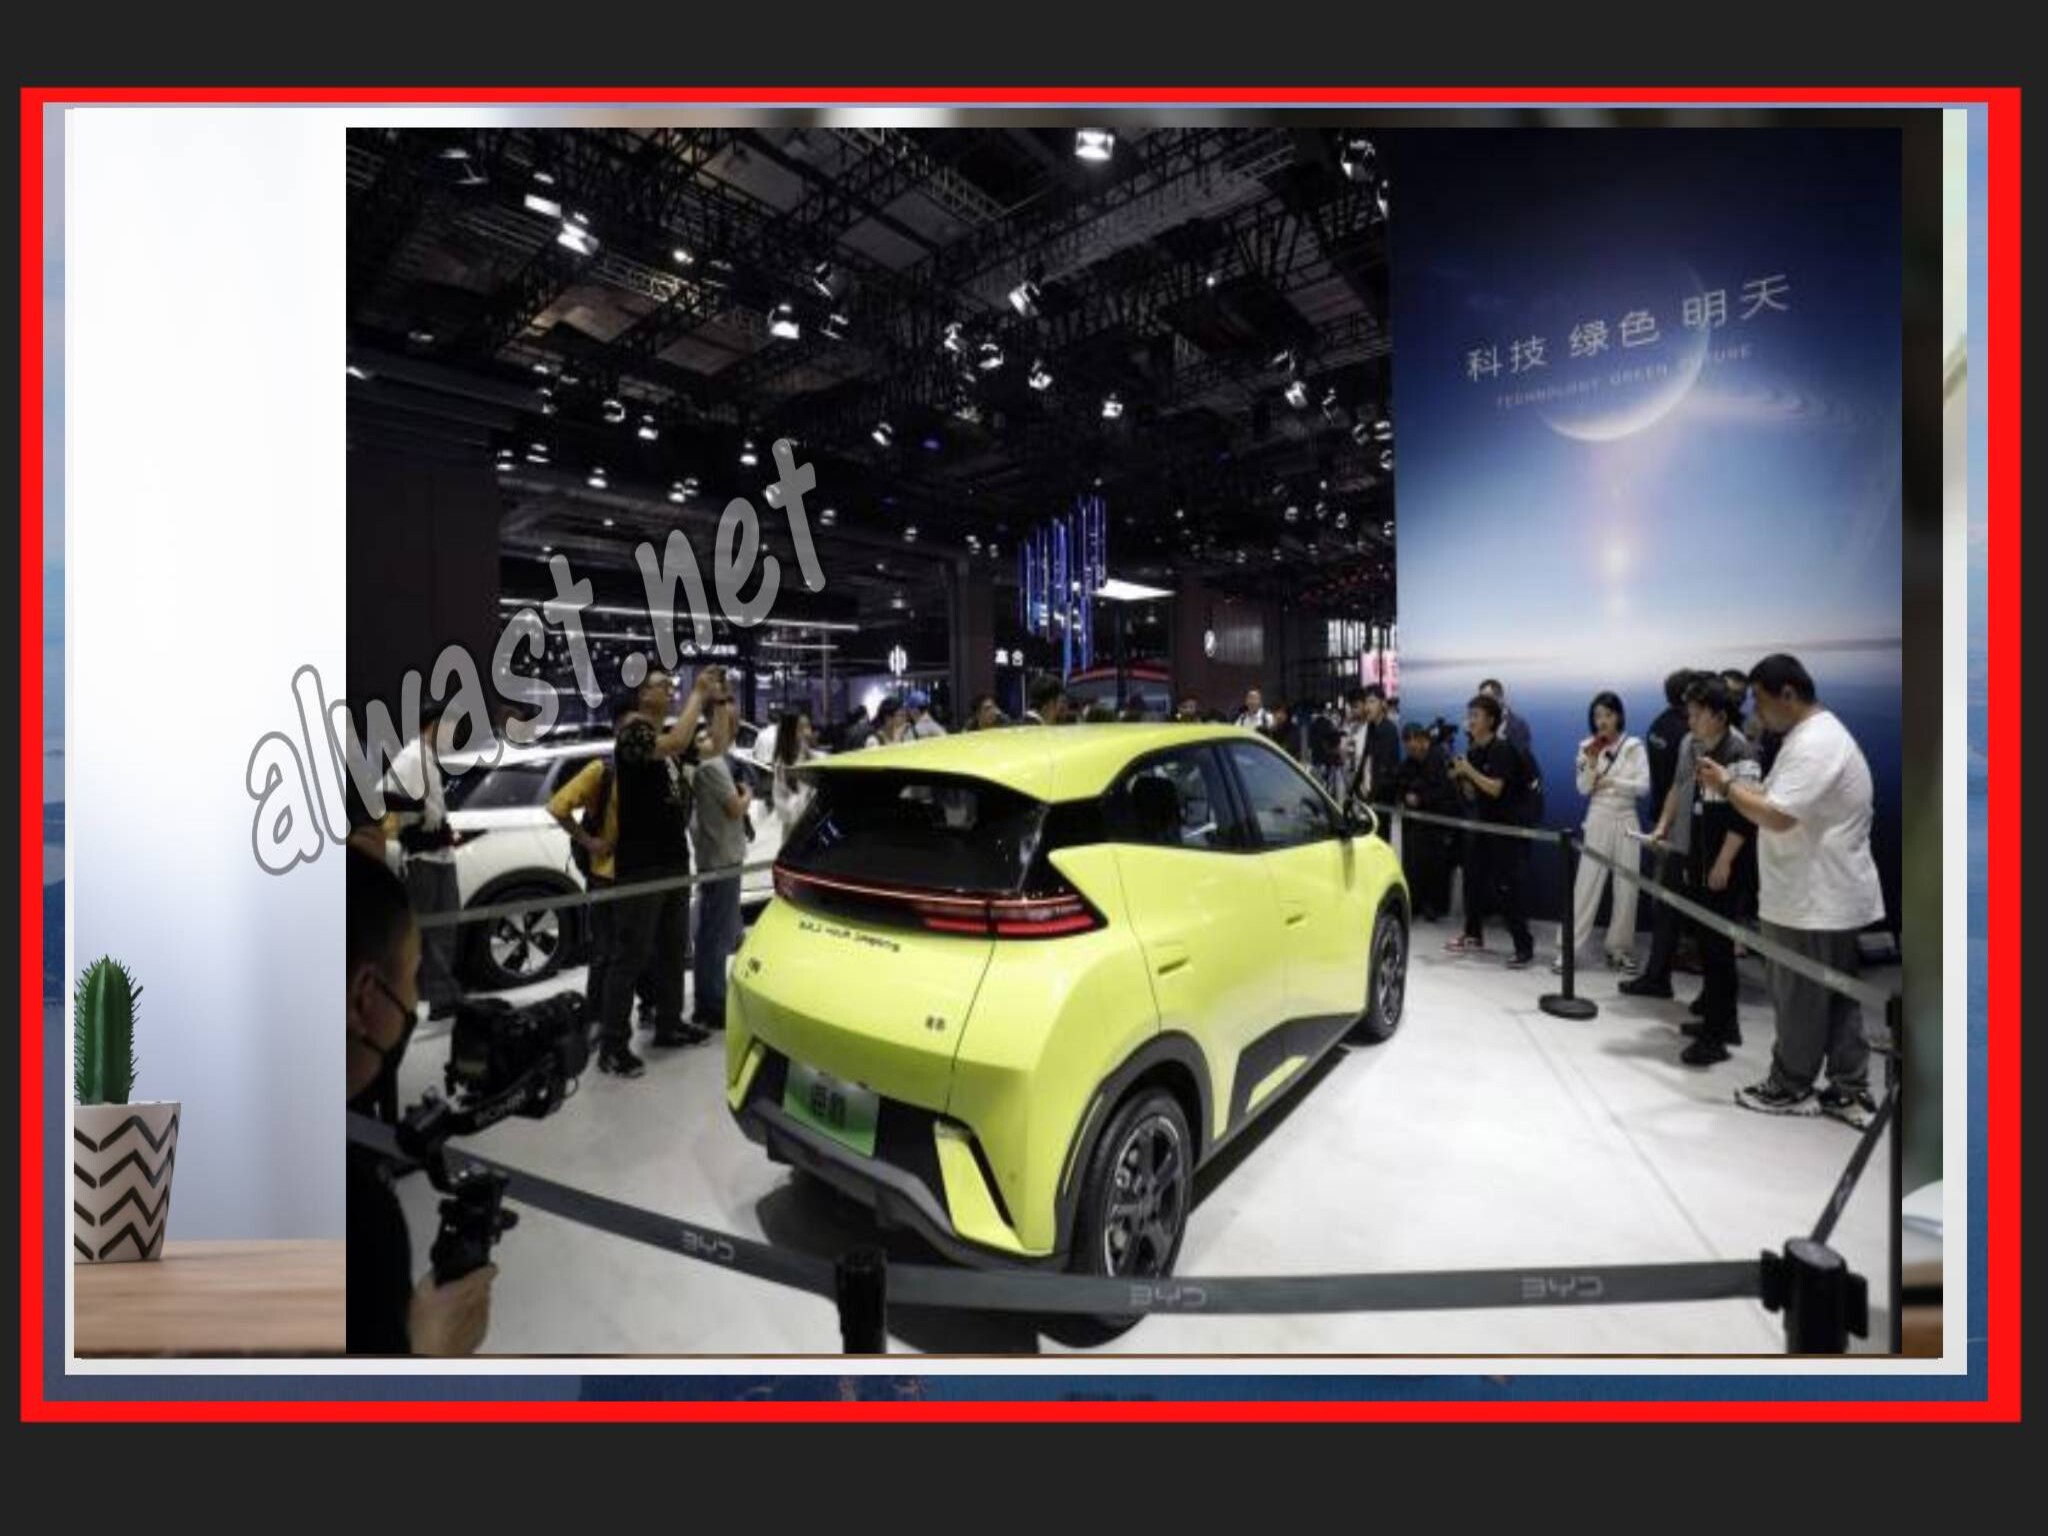 China's $10,000 EV Invades Europe! Can Carmakers Compete?